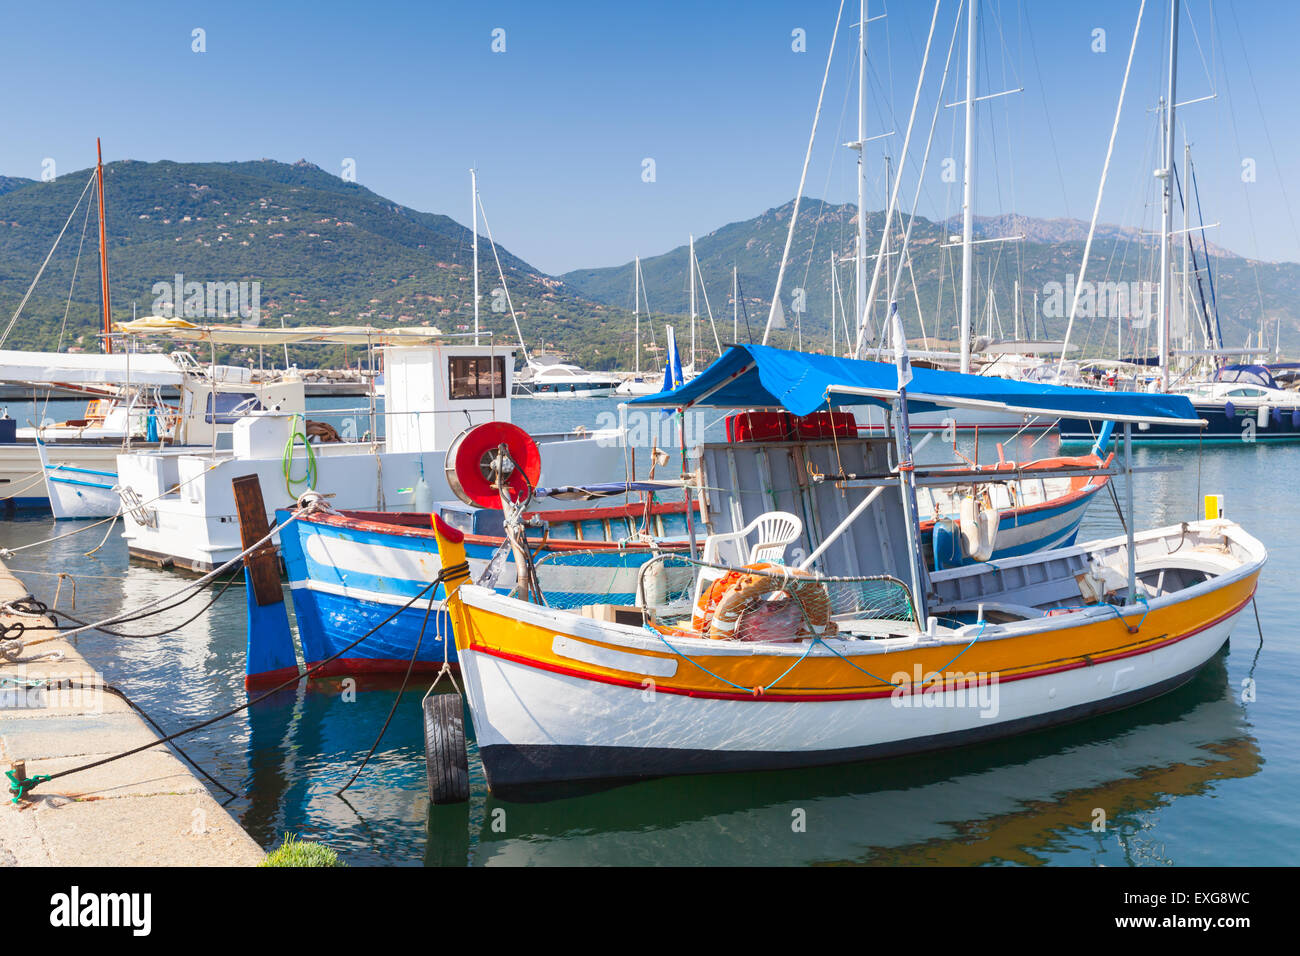 Small colorful wooden fishing boats moored in Propriano town, Corsica, France Stock Photo